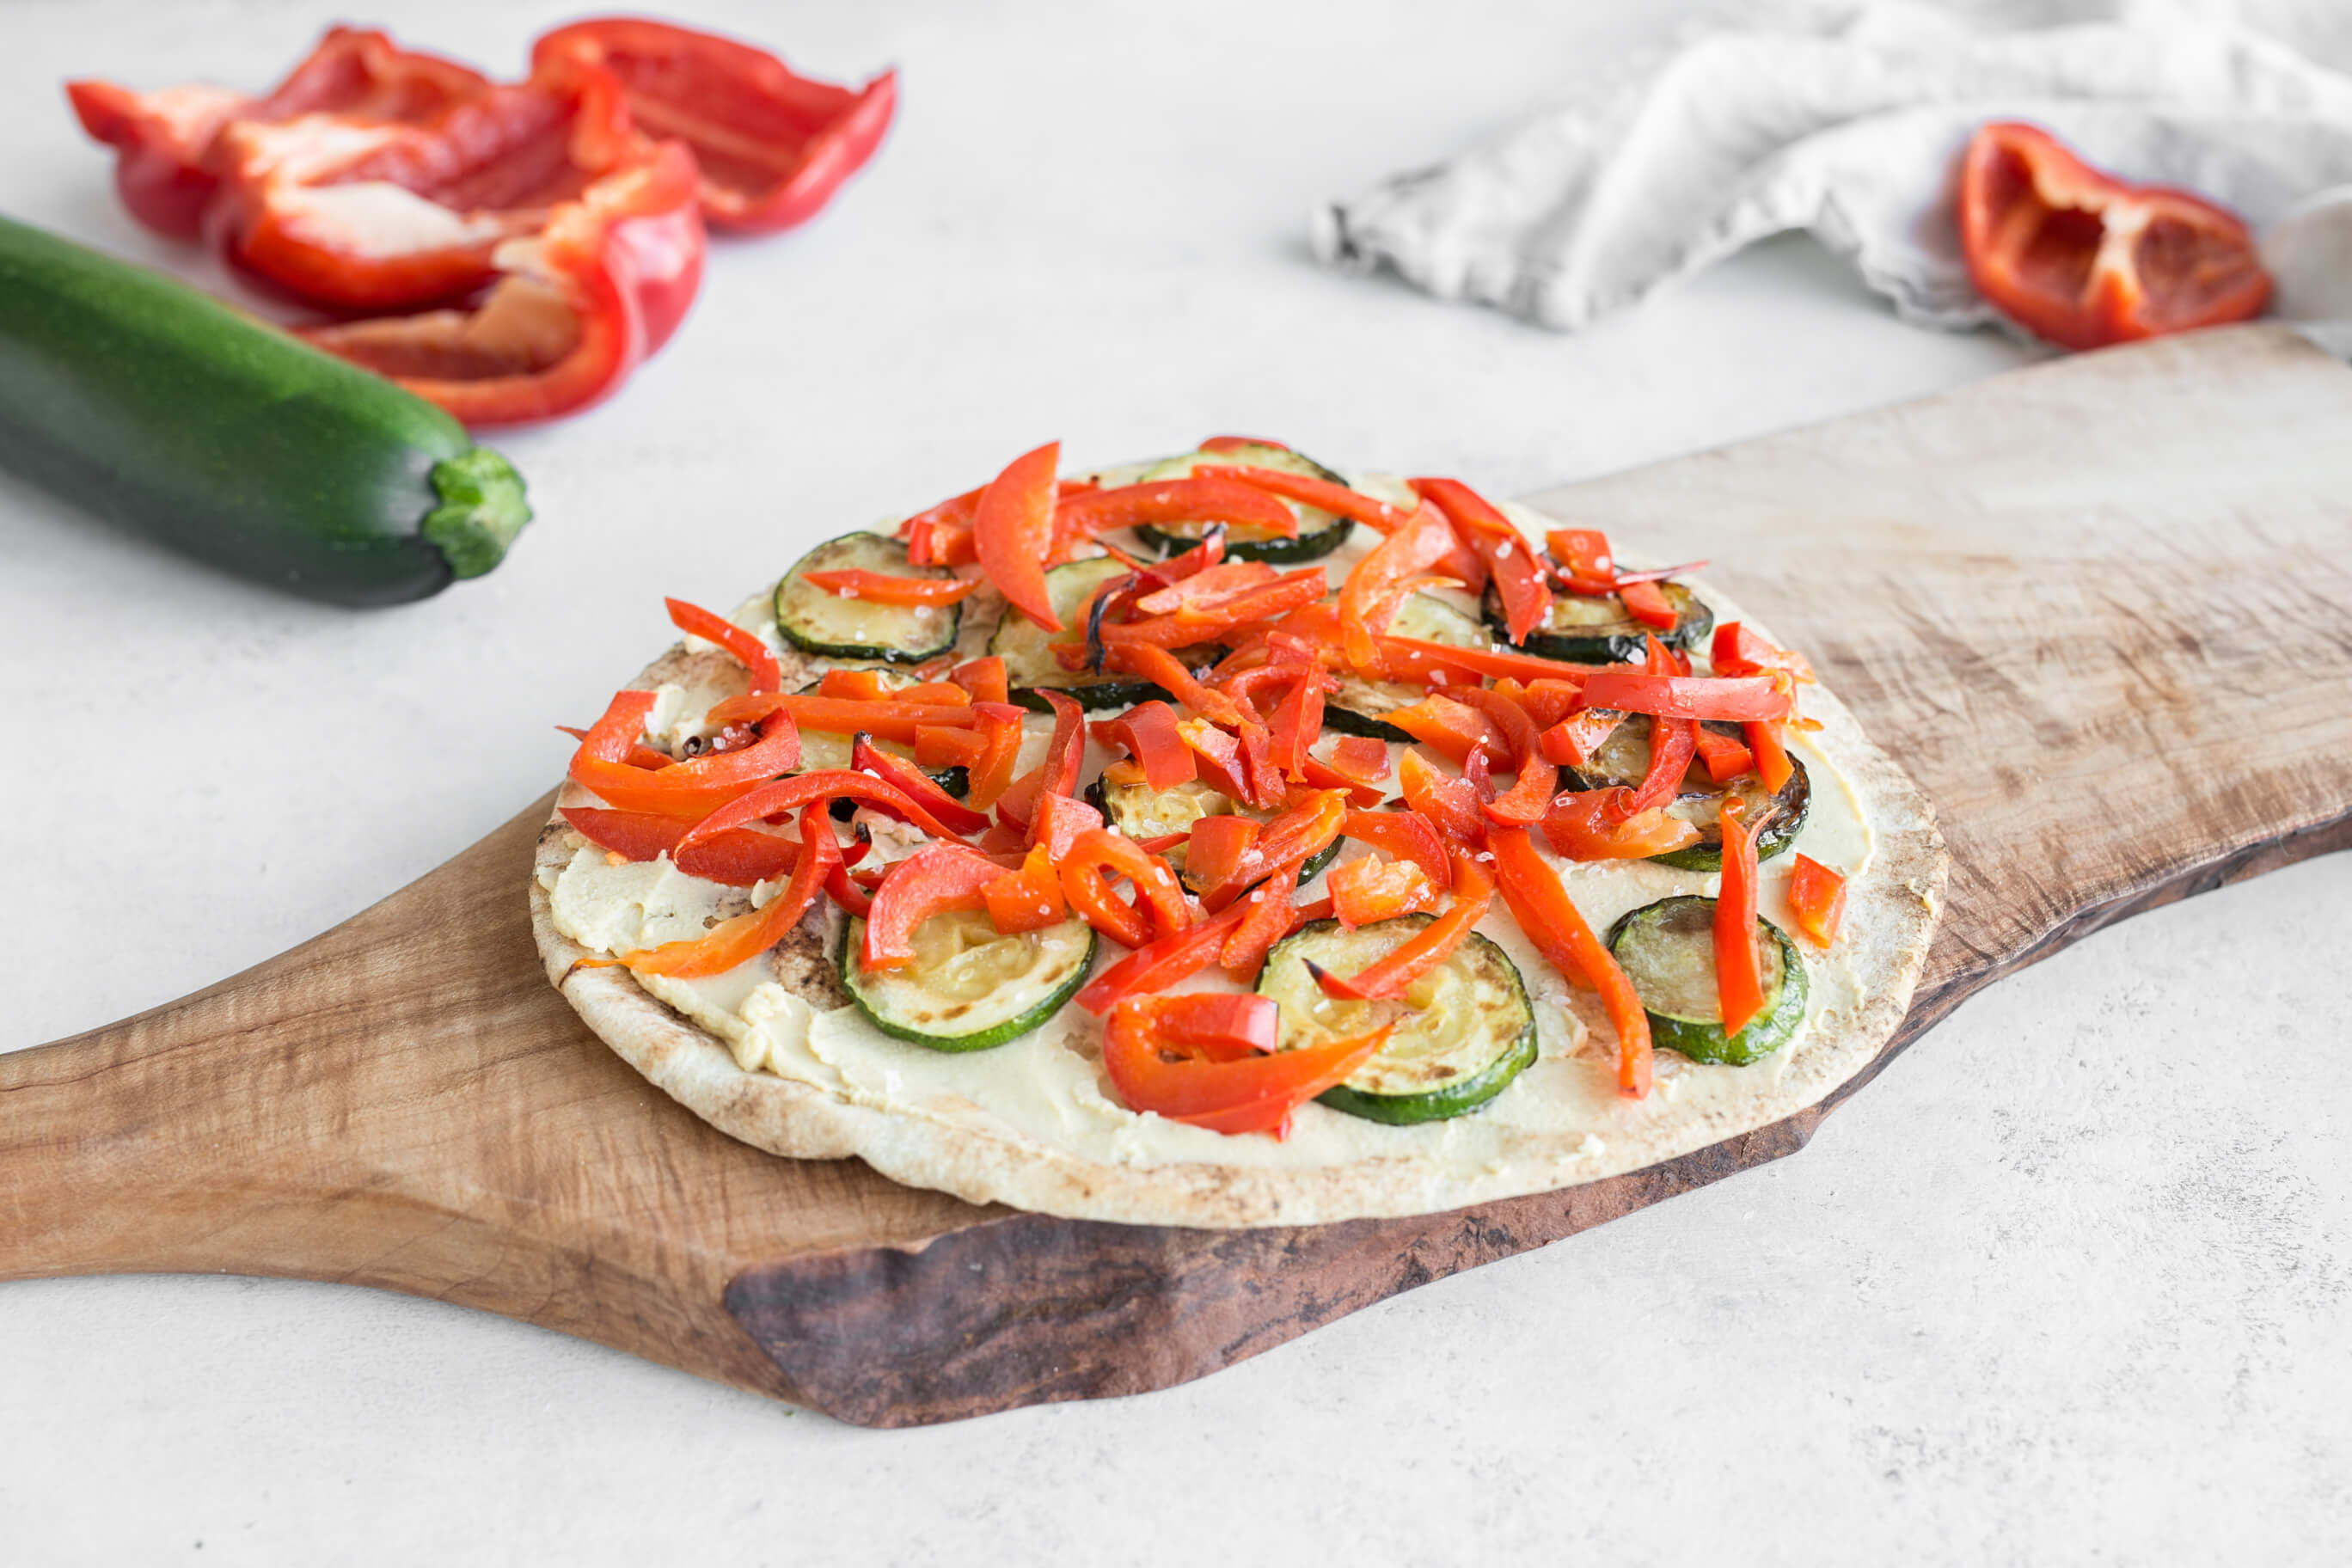 5 Ingredient Meal Ideas Your Clients Will Love: Veggie Pita Pizza with Hummus